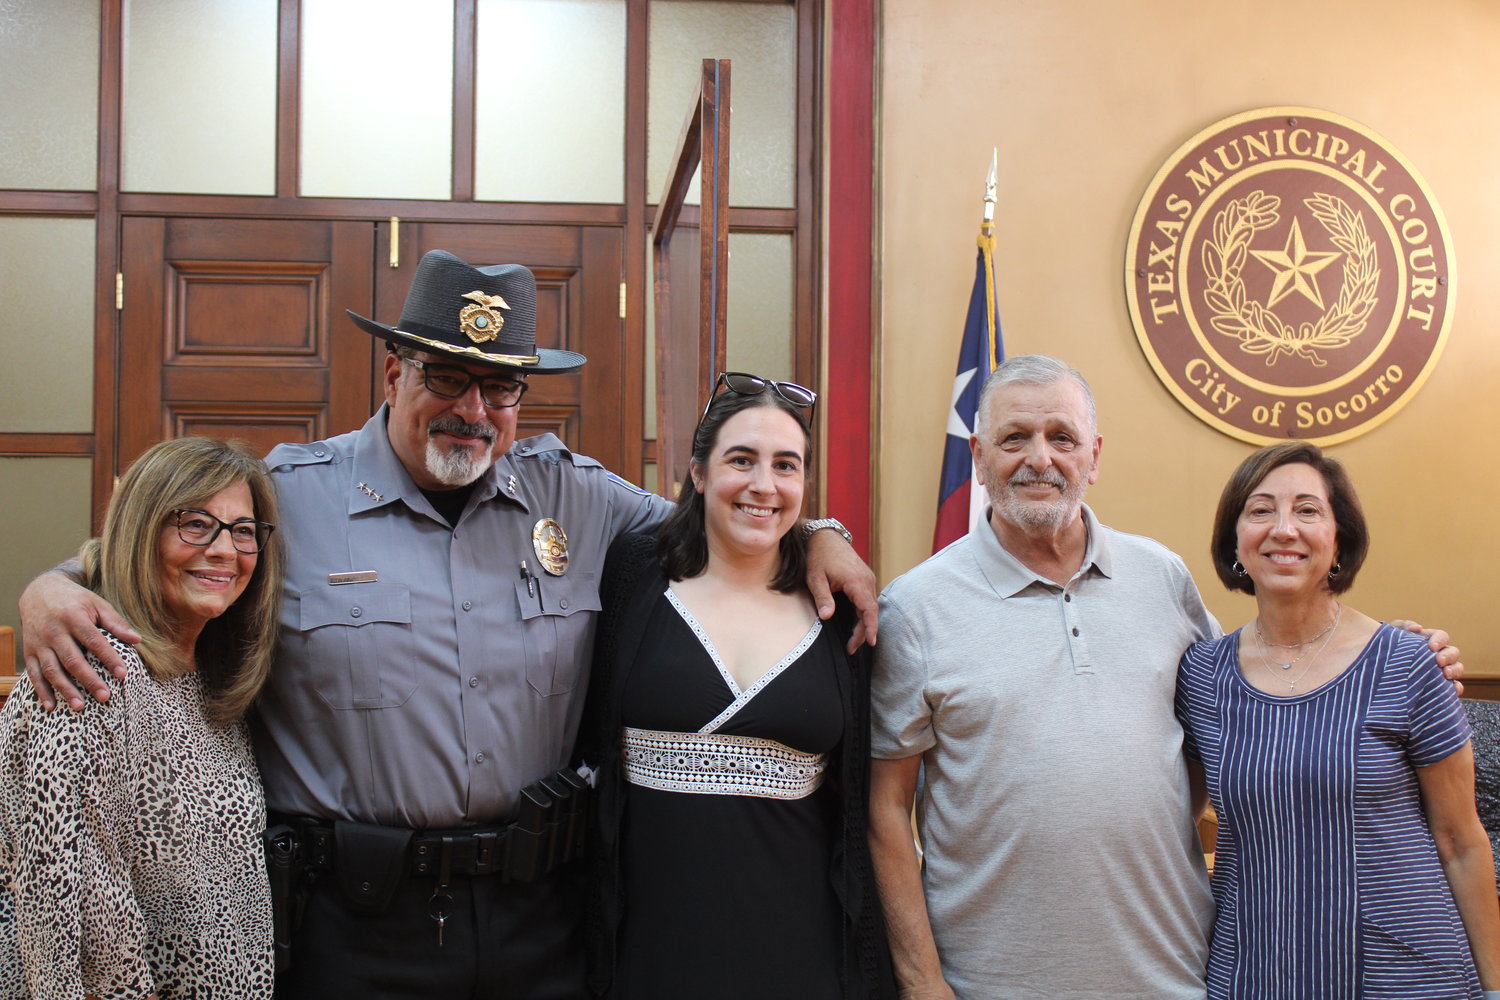 Barrington native Jason Stanzione (second from left) stands for a photo with his family. Stanzione was recently installed as the Deputy Police Chief of Socorro, Texas.